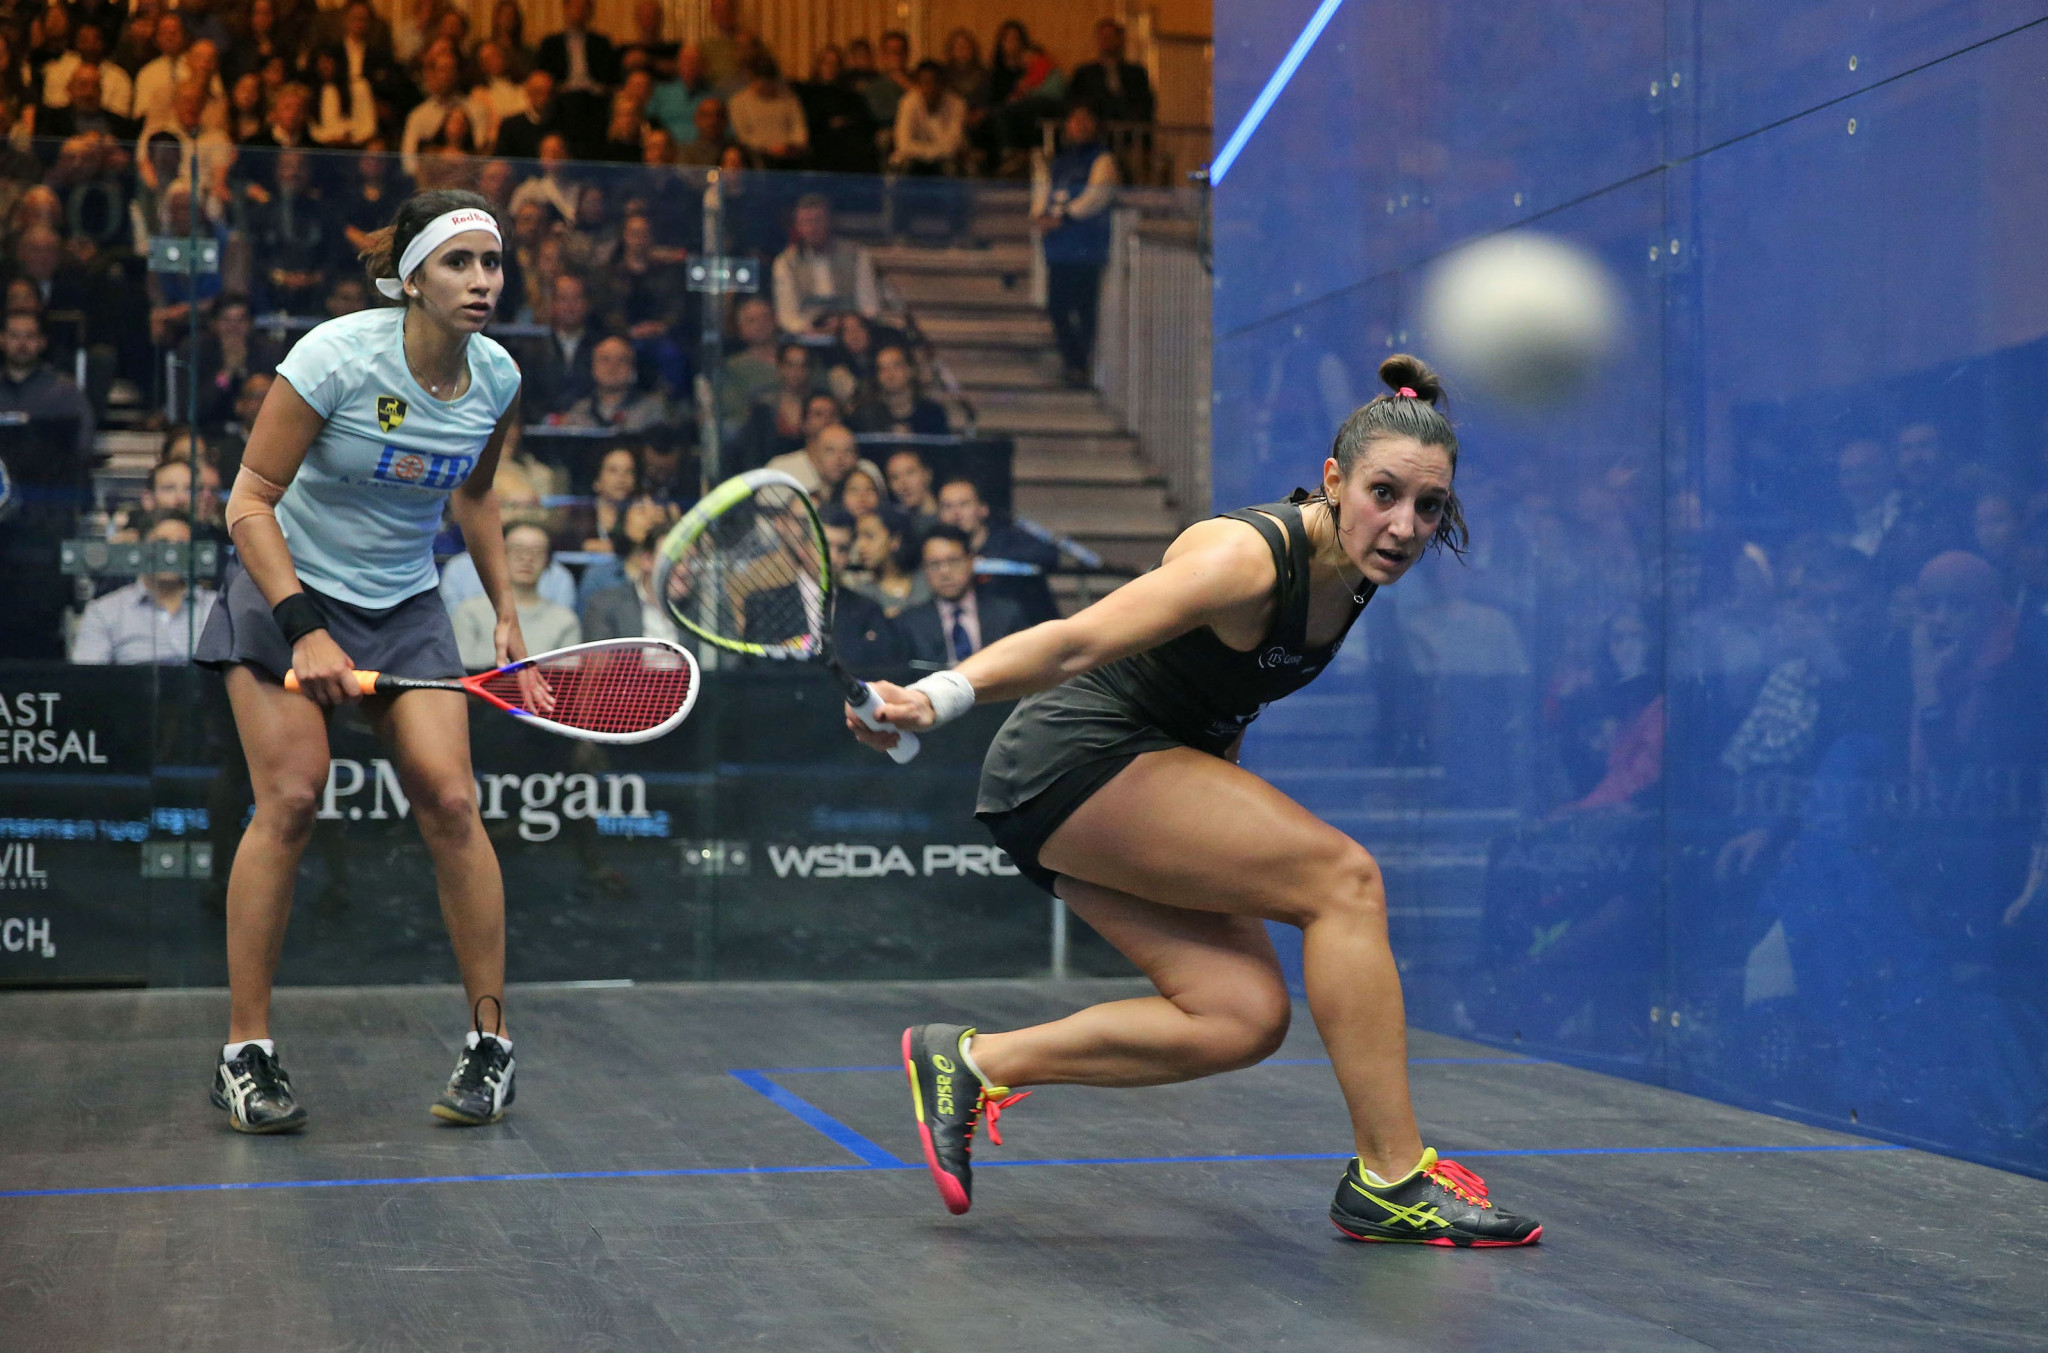 France’s Camille Serme beat Egypt's Nouran Gohar to reach the final of the women's event ©PSA